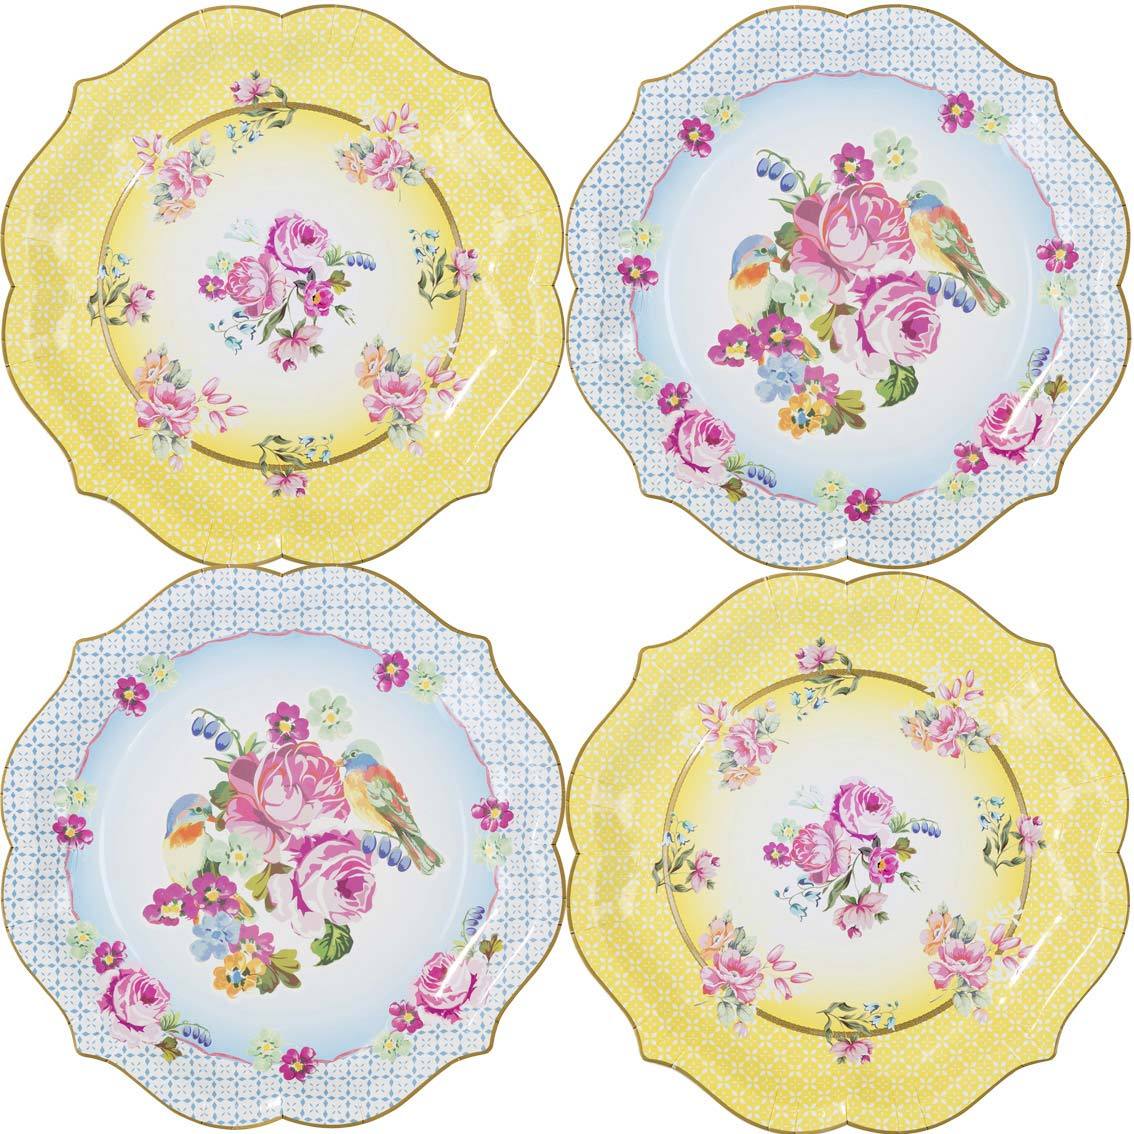 Truly Scrumptious Serving Plates Pack of 4